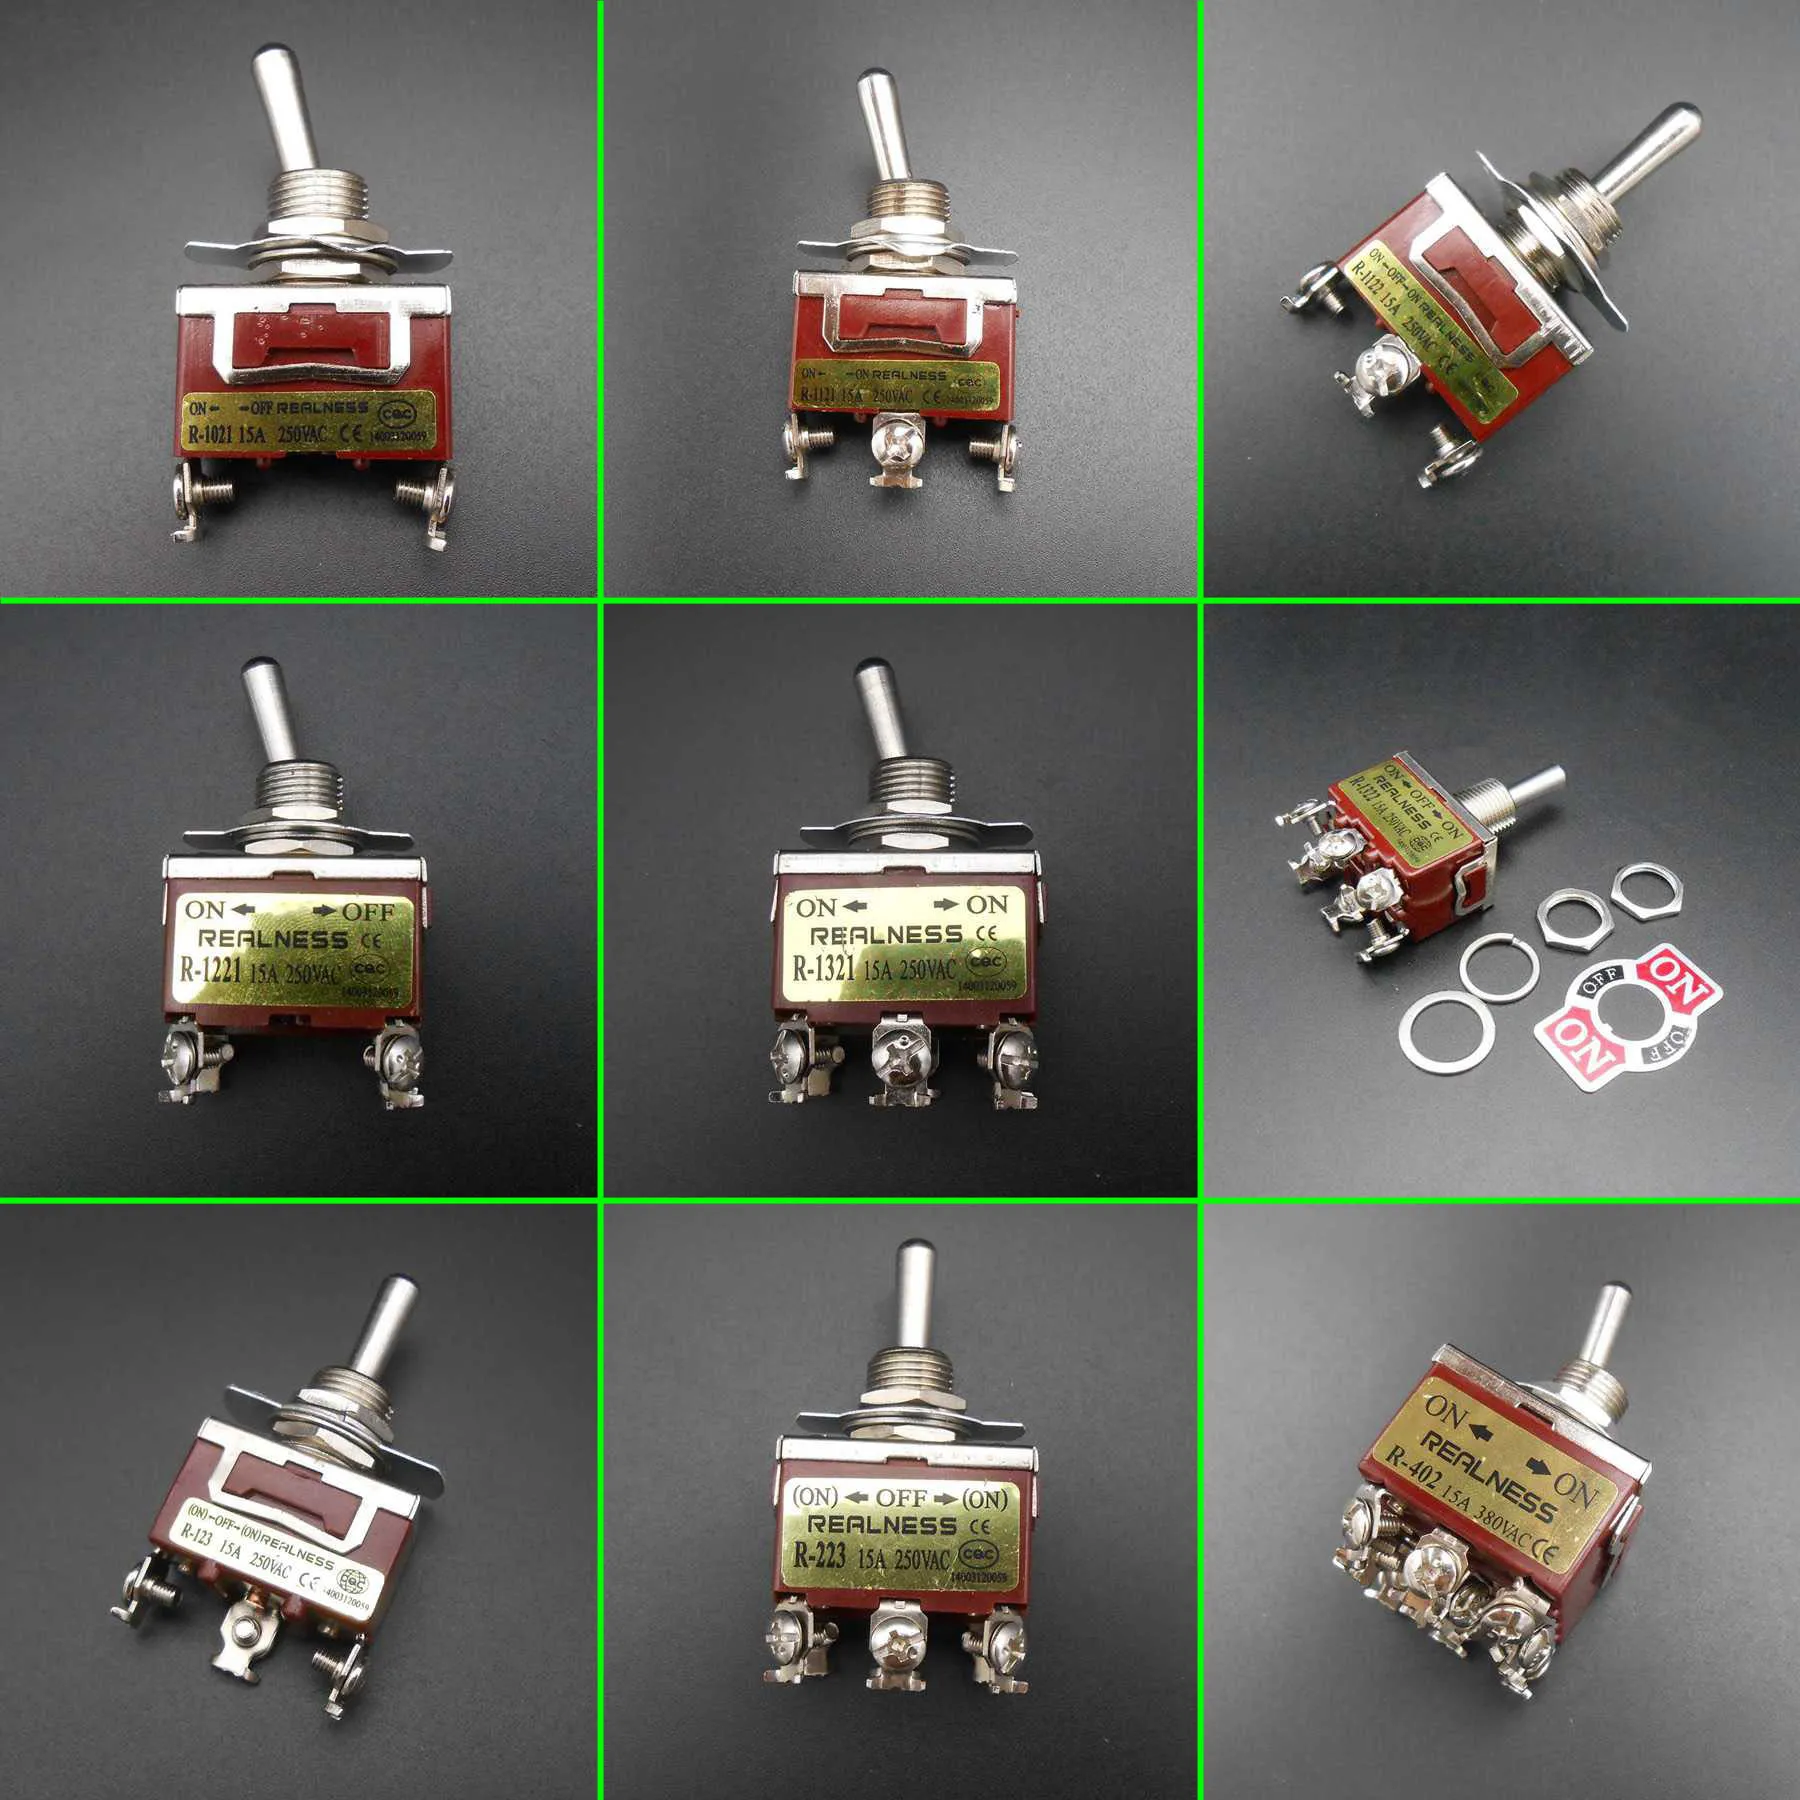 

20Pcs REALNESS Toggle Switch 15A 250VAC / 380VAC 2/3/4/6/12 Feet 2/3 Positions Silver Contact Mounting Hole 12mm Reset FD441-449